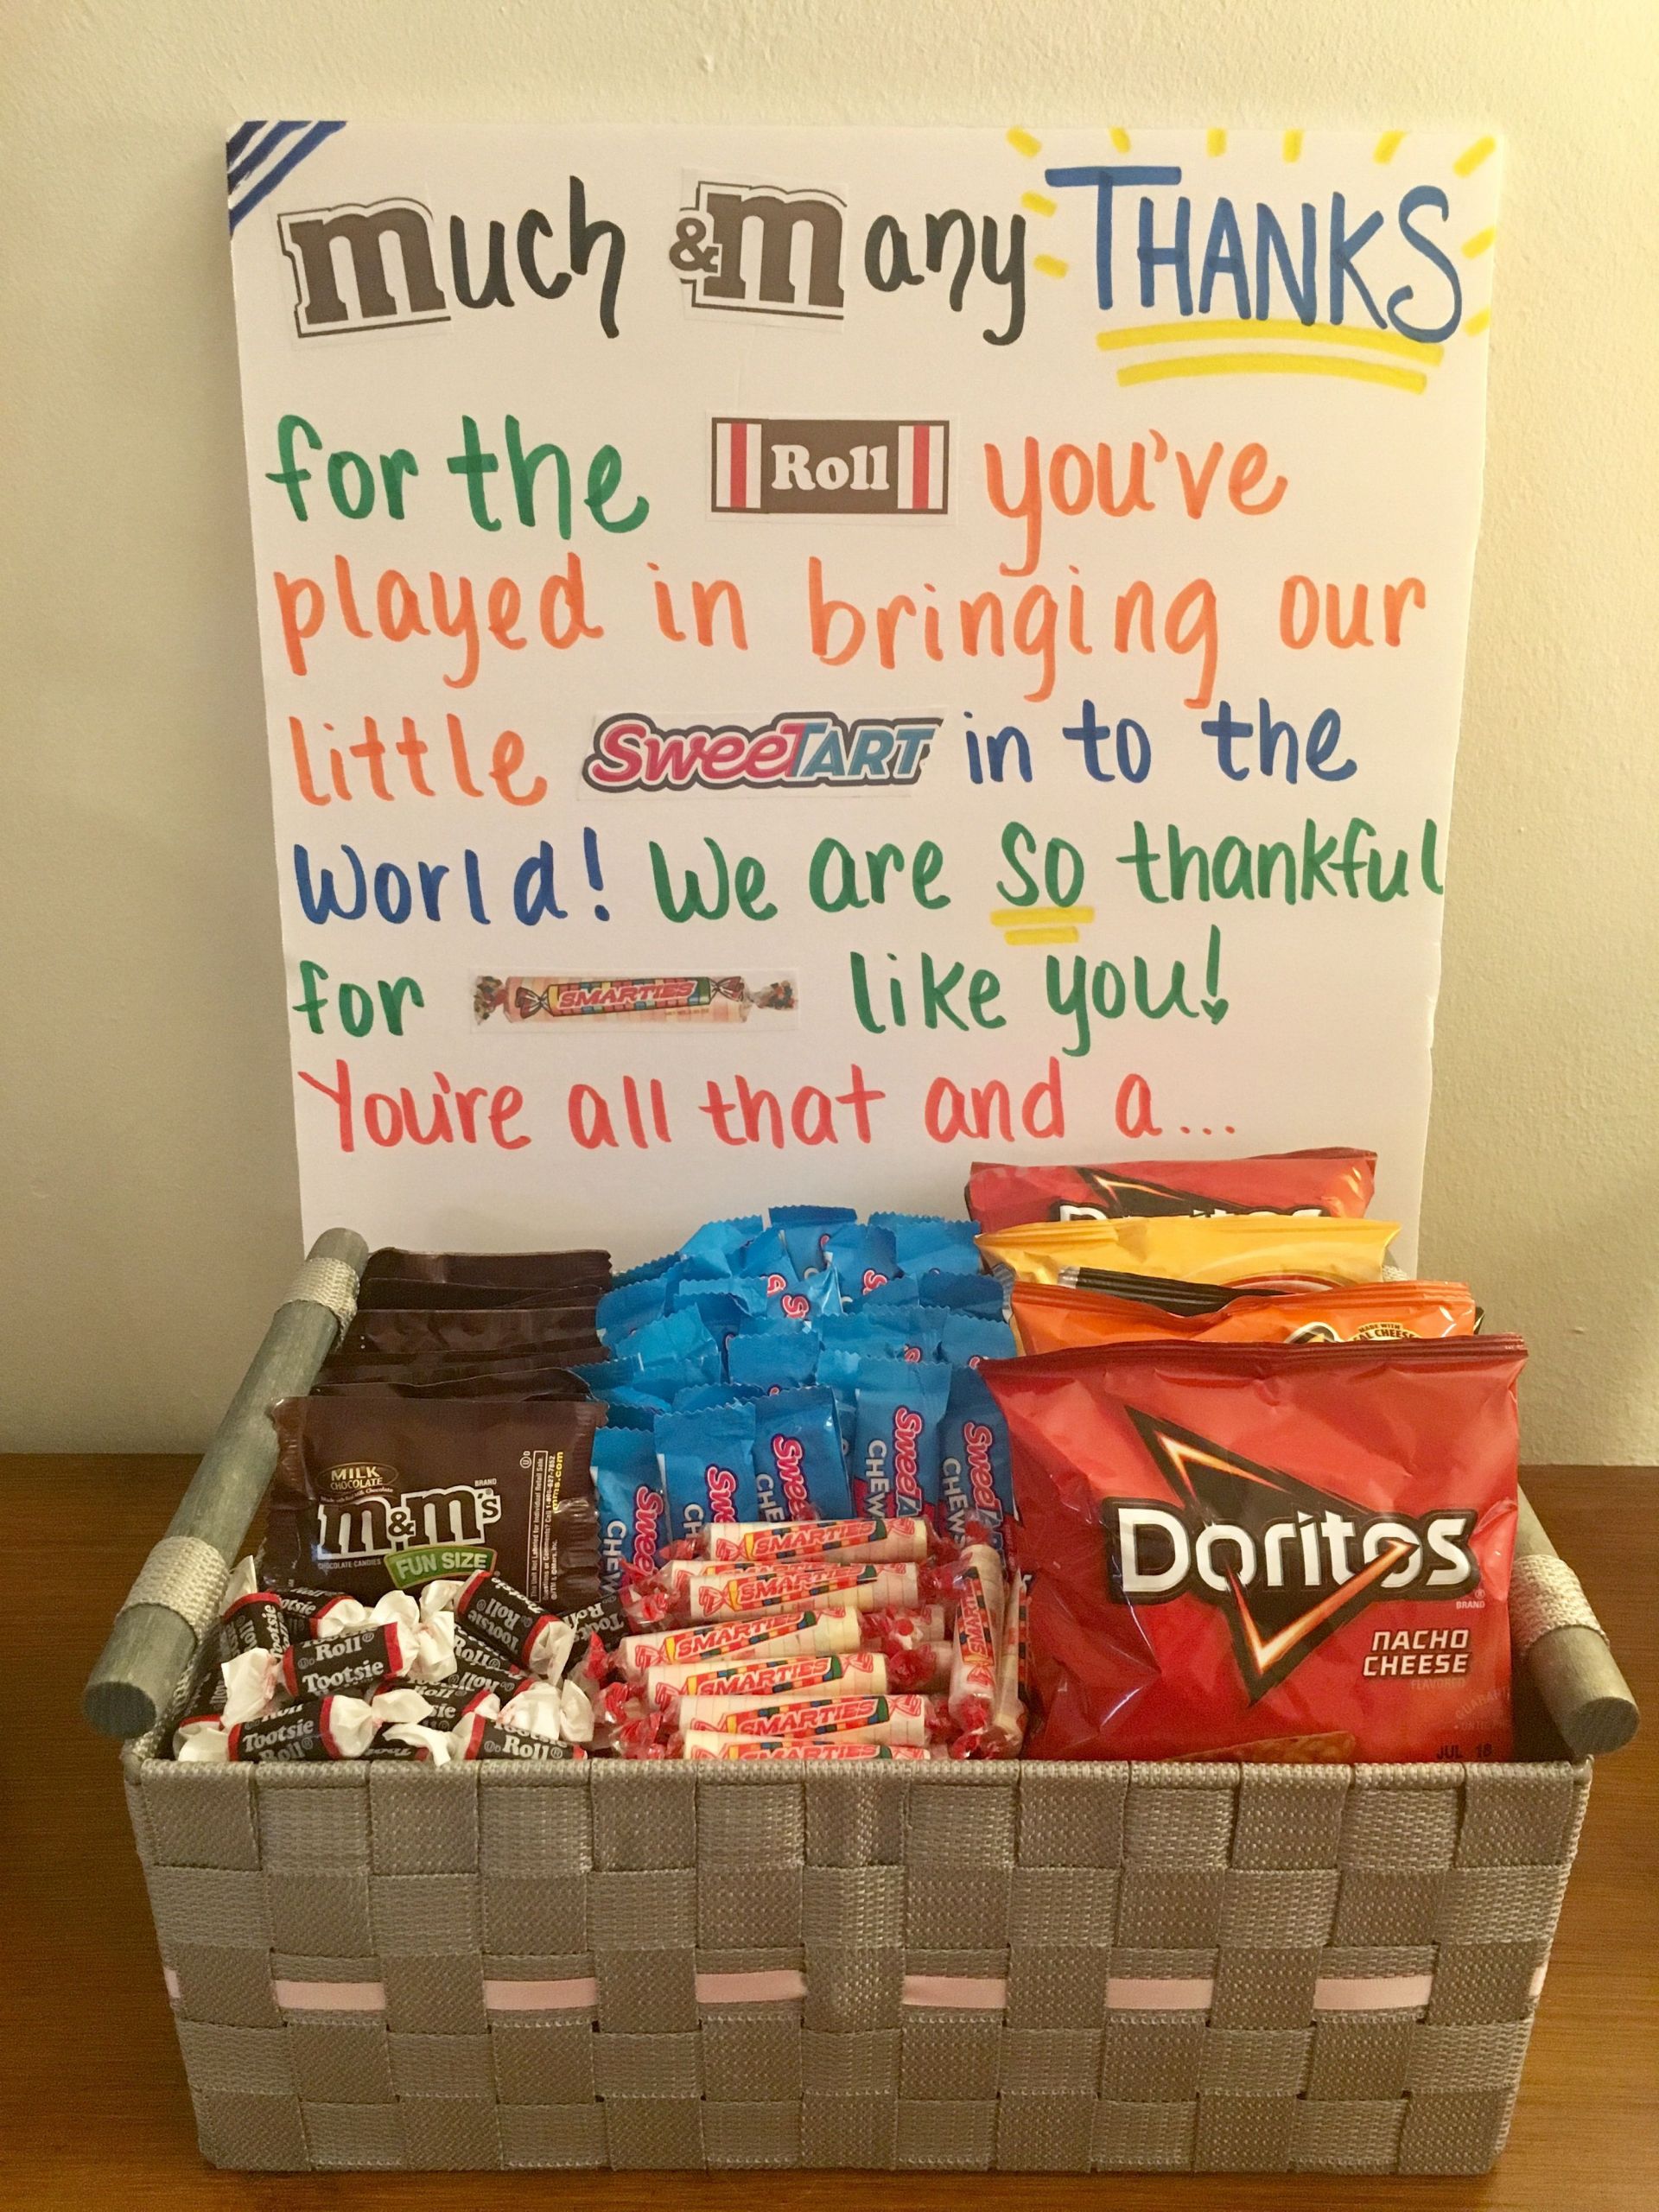 The 22 Best Ideas for Thank You Gift Baskets Ideas Home, Family